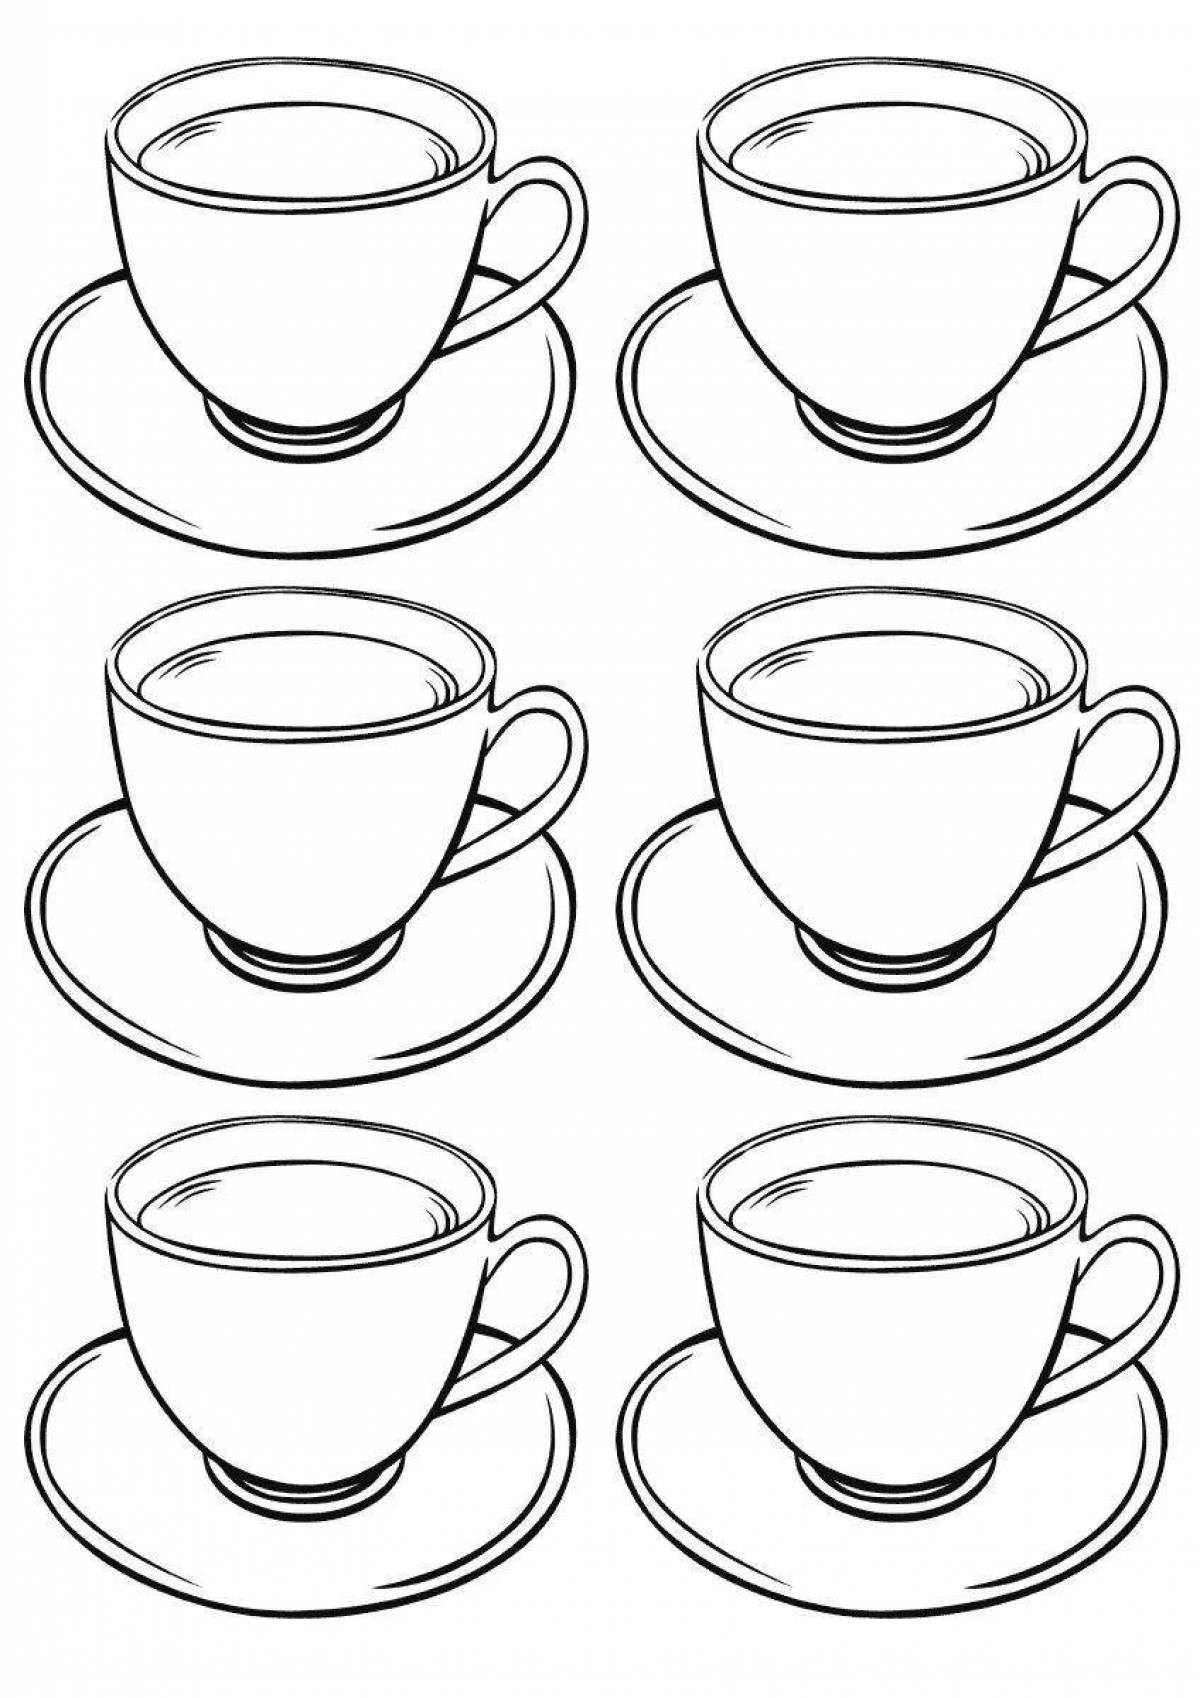 Playful mugs and cups coloring page